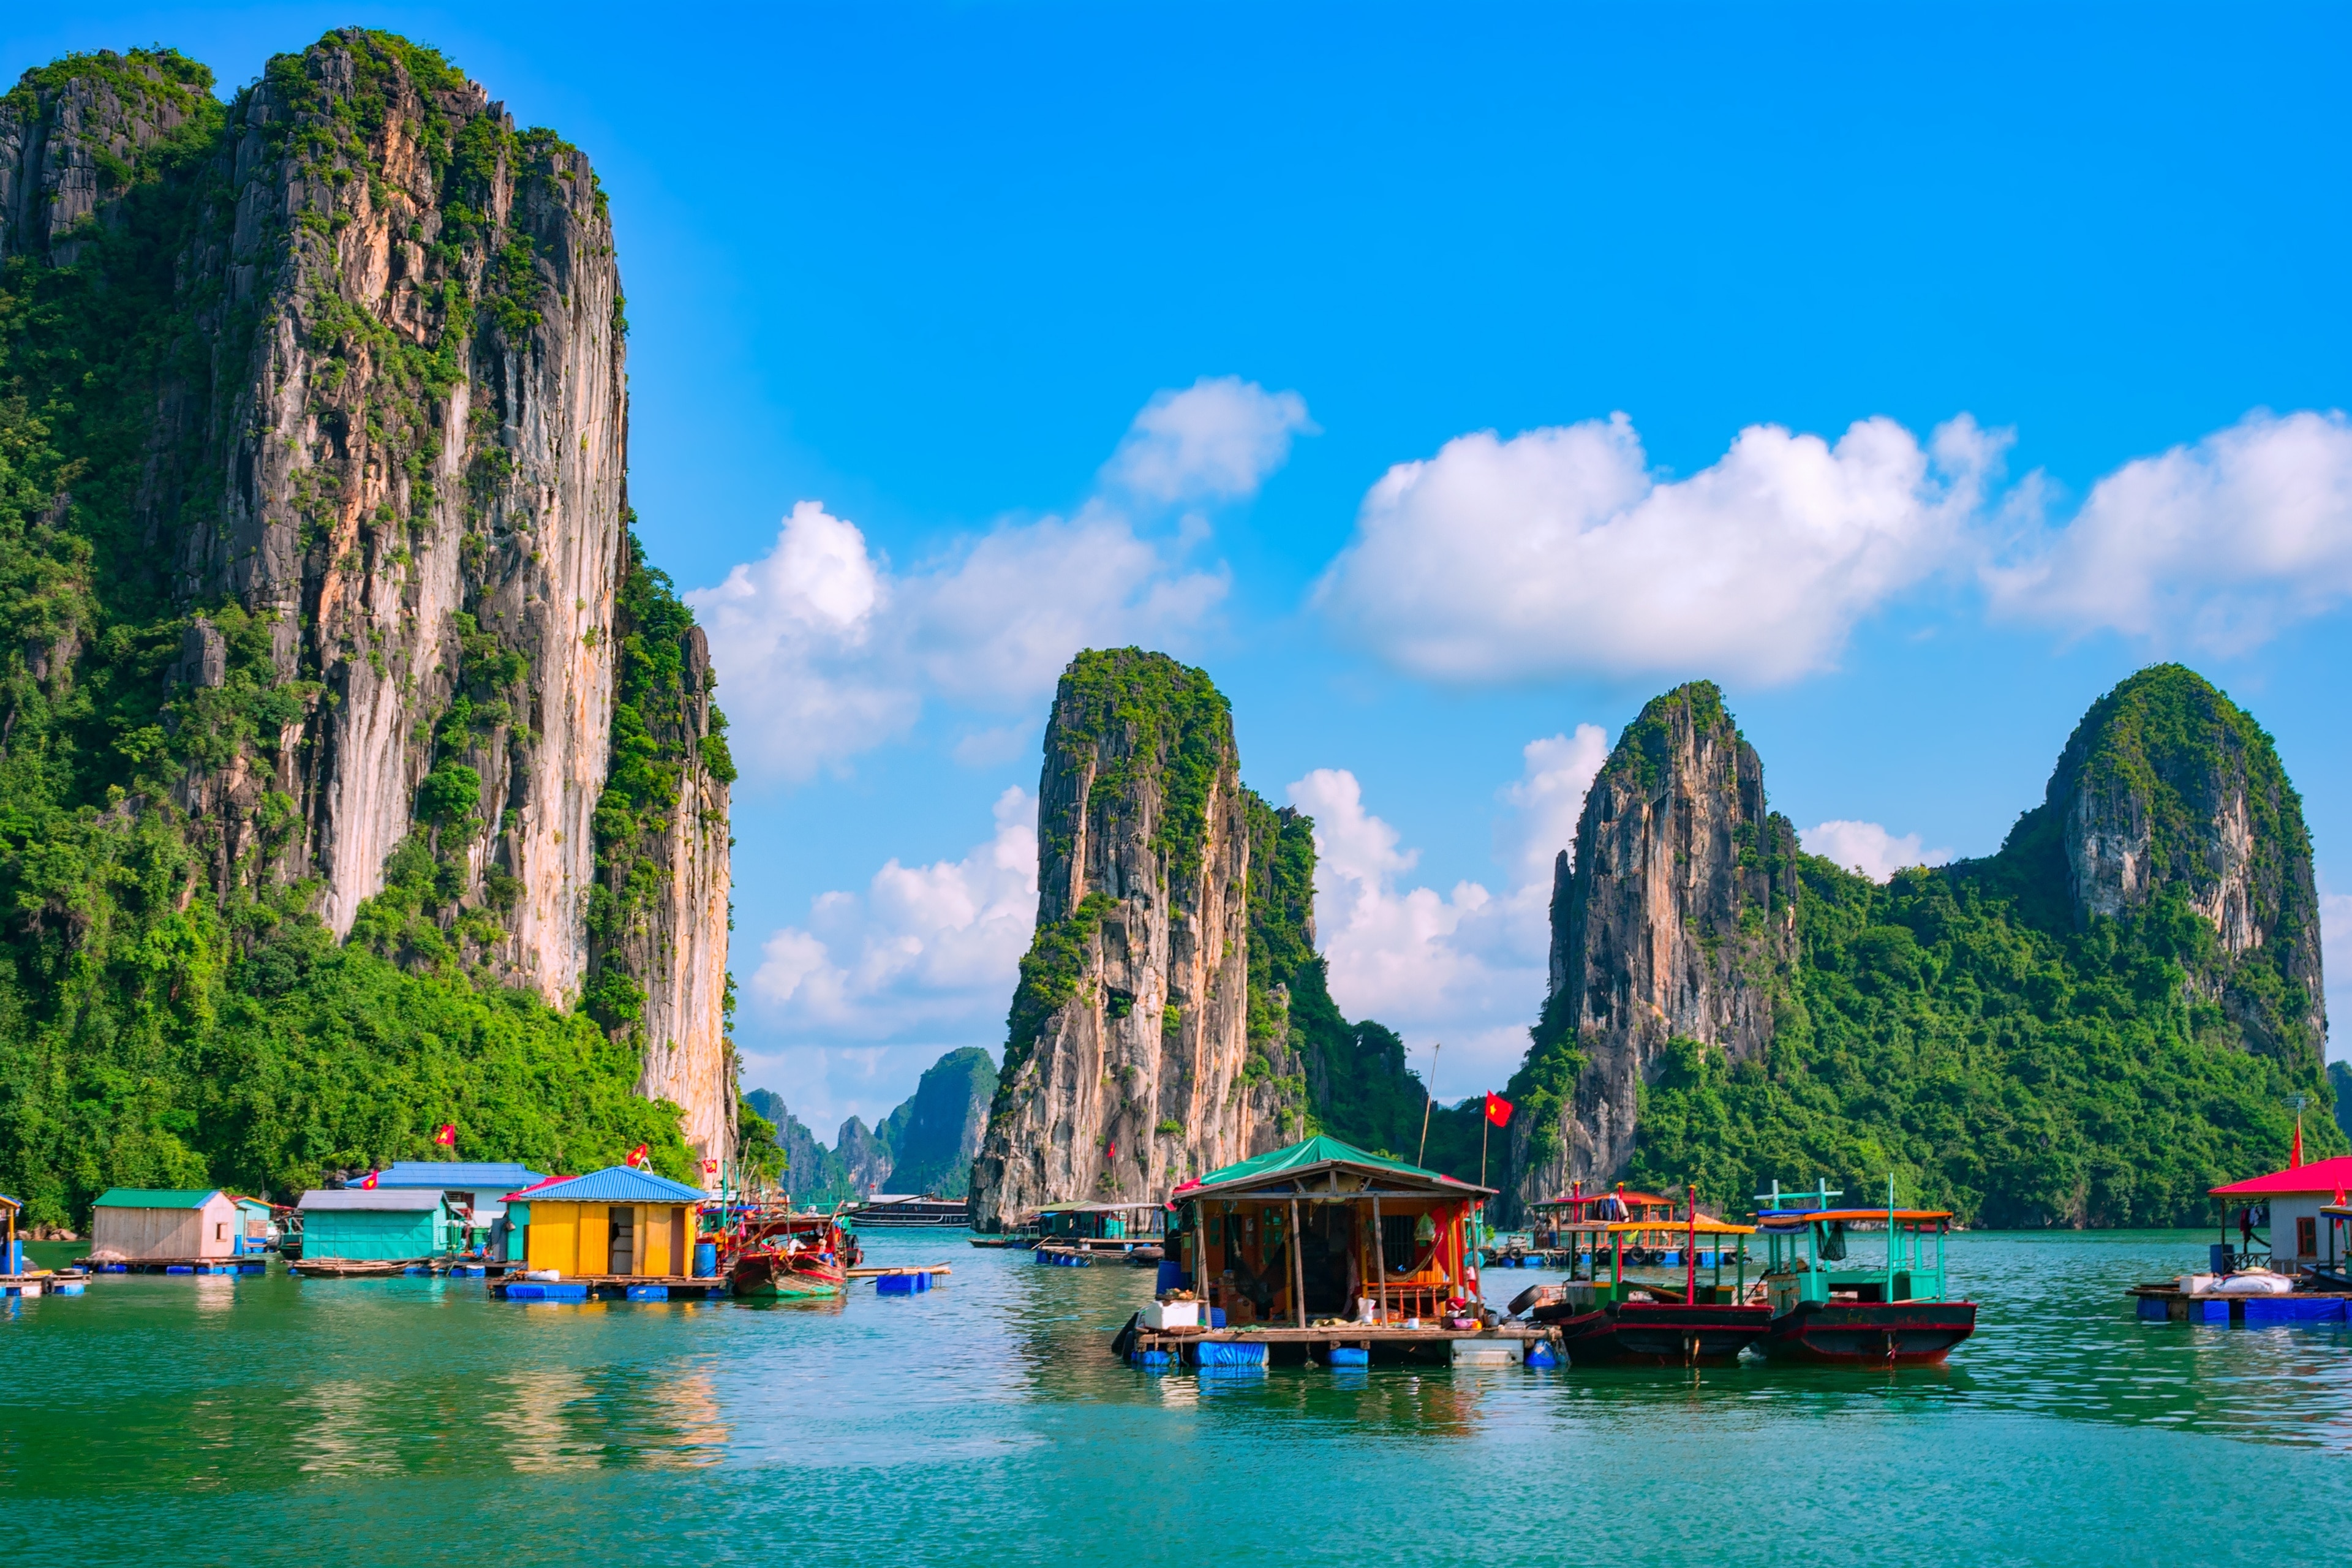  Immerse yourself in the breathtaking beauty of Halong Bay and Sapa, two must-see destinations in Vietnam.